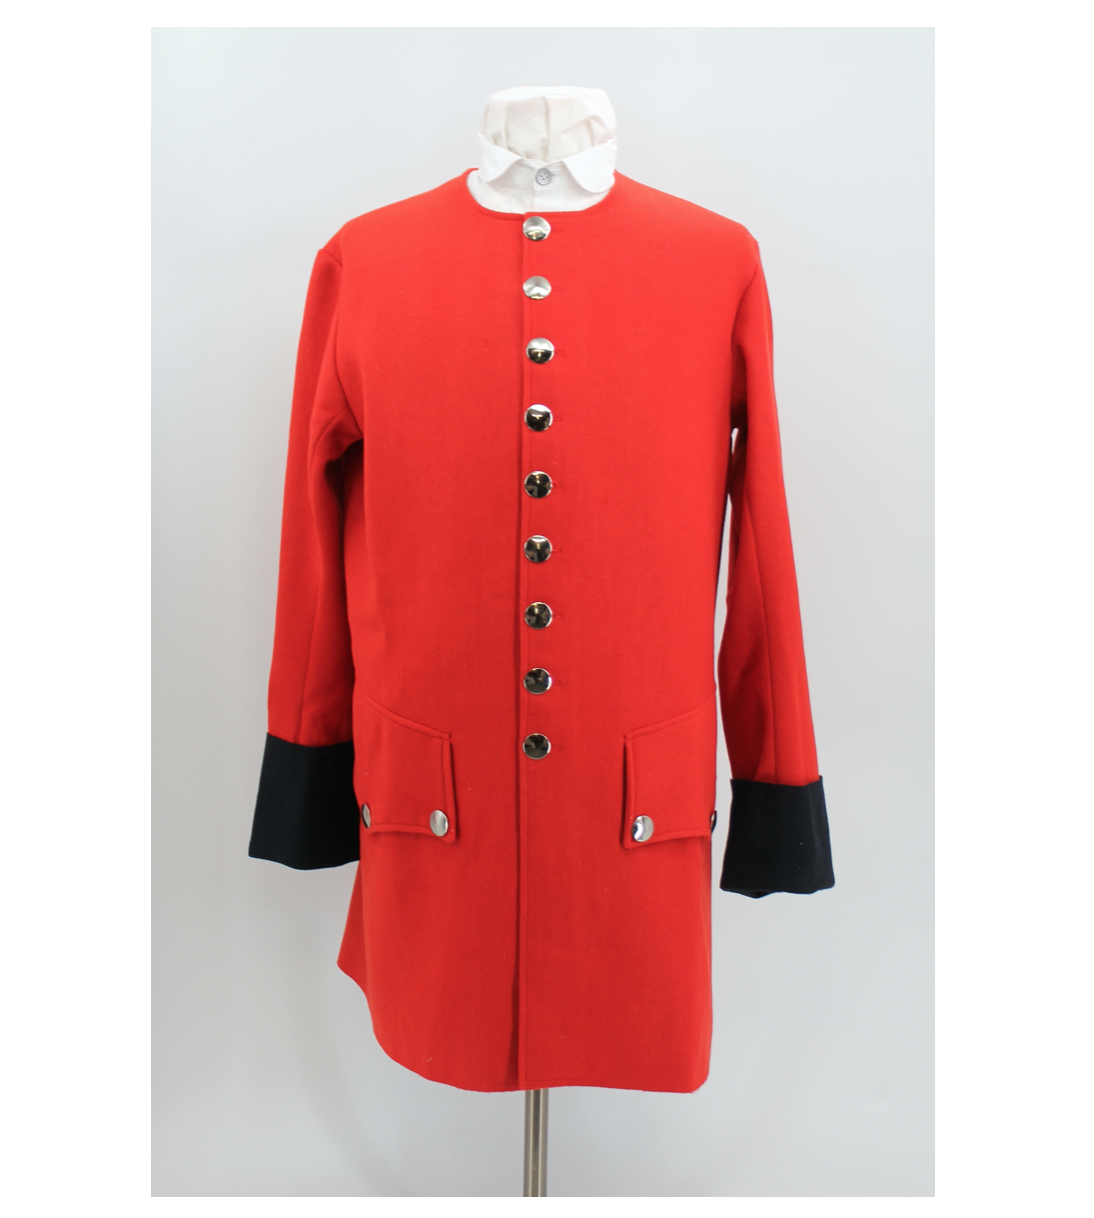 Red Wool Sleeved Waistcoat with Blue Cuffs - 1754 Virginia Regiment - Size 50 Без бренда